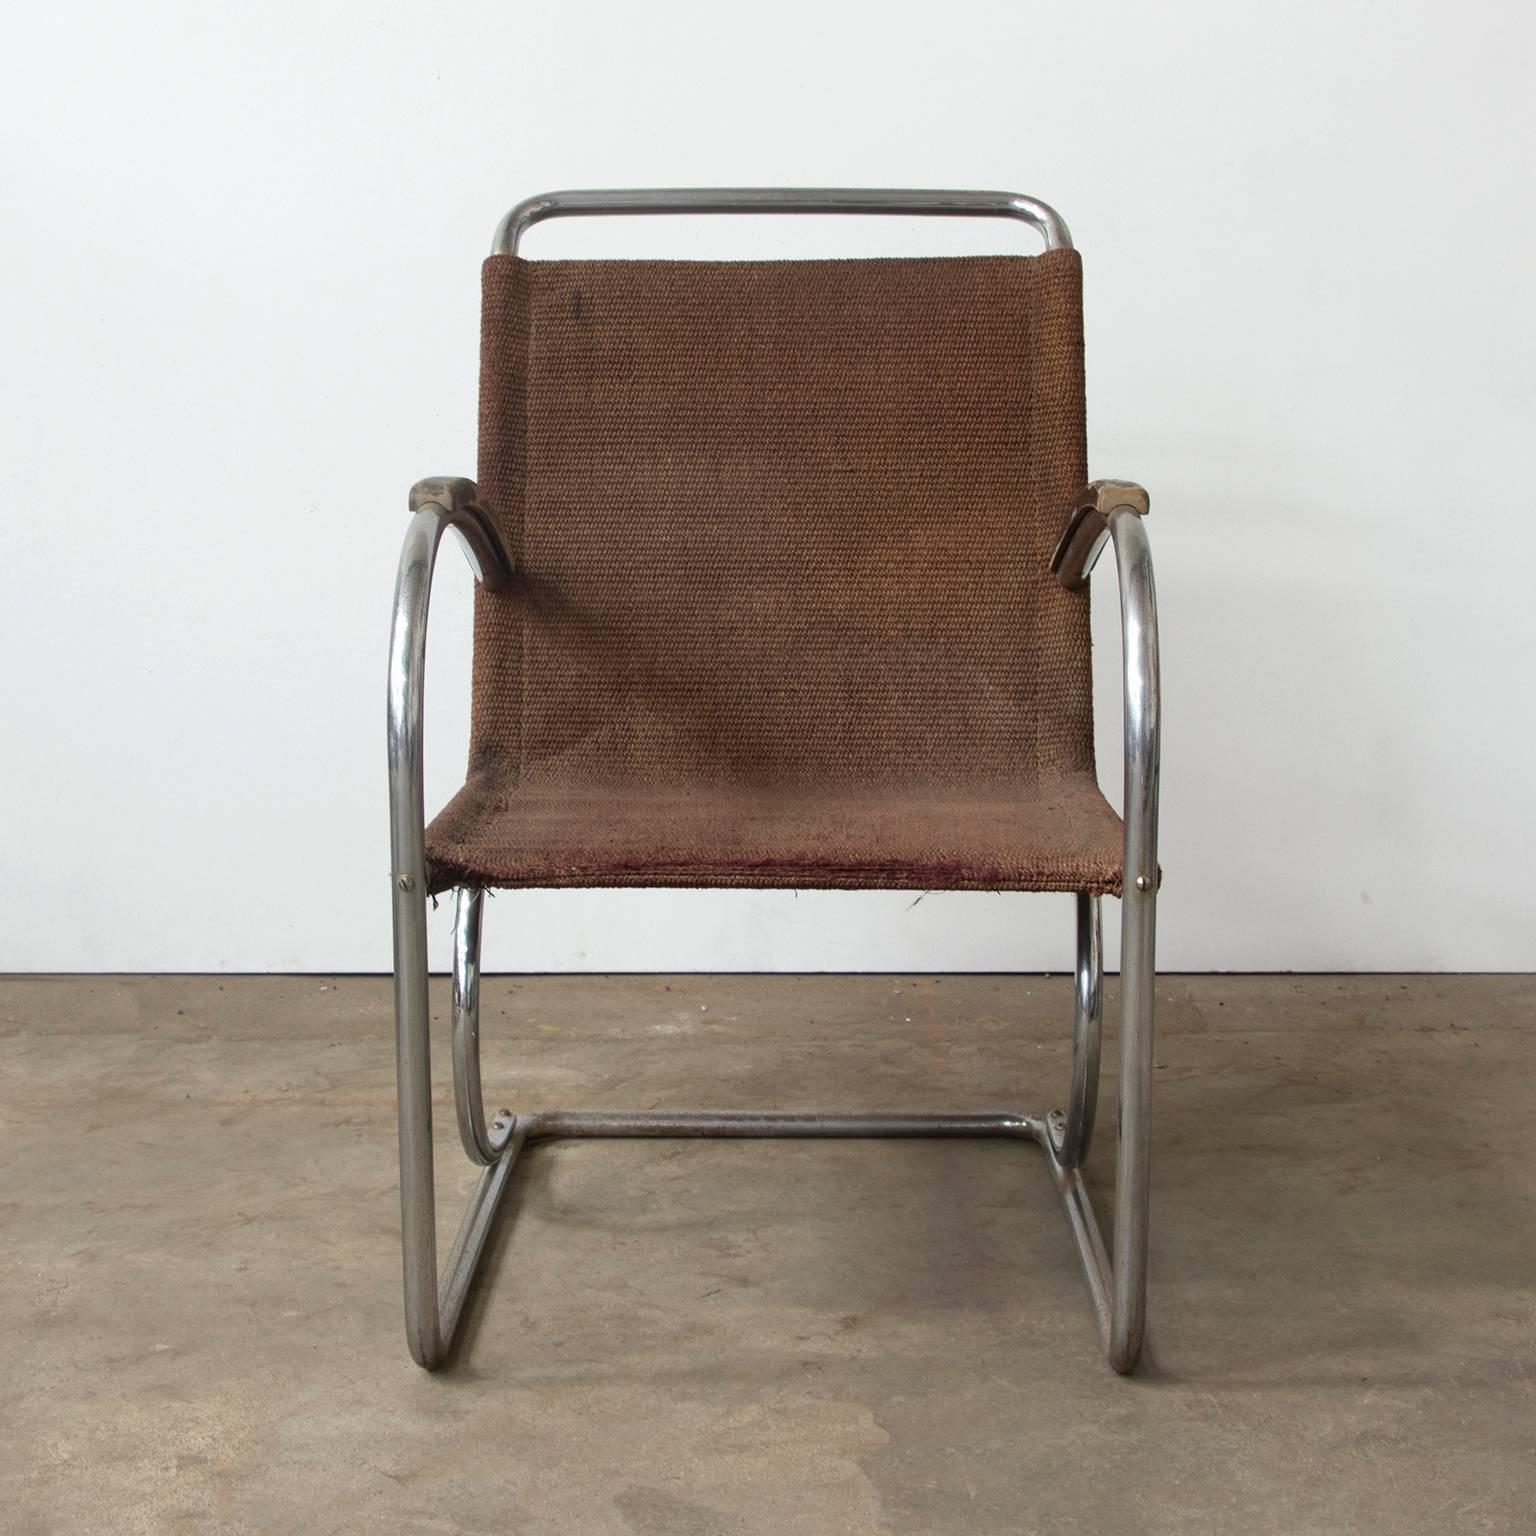 Circa 1930, Original, Early Tubular Easy Chair with Original Robe Woven Seat In Good Condition For Sale In Amsterdam IJMuiden, NL